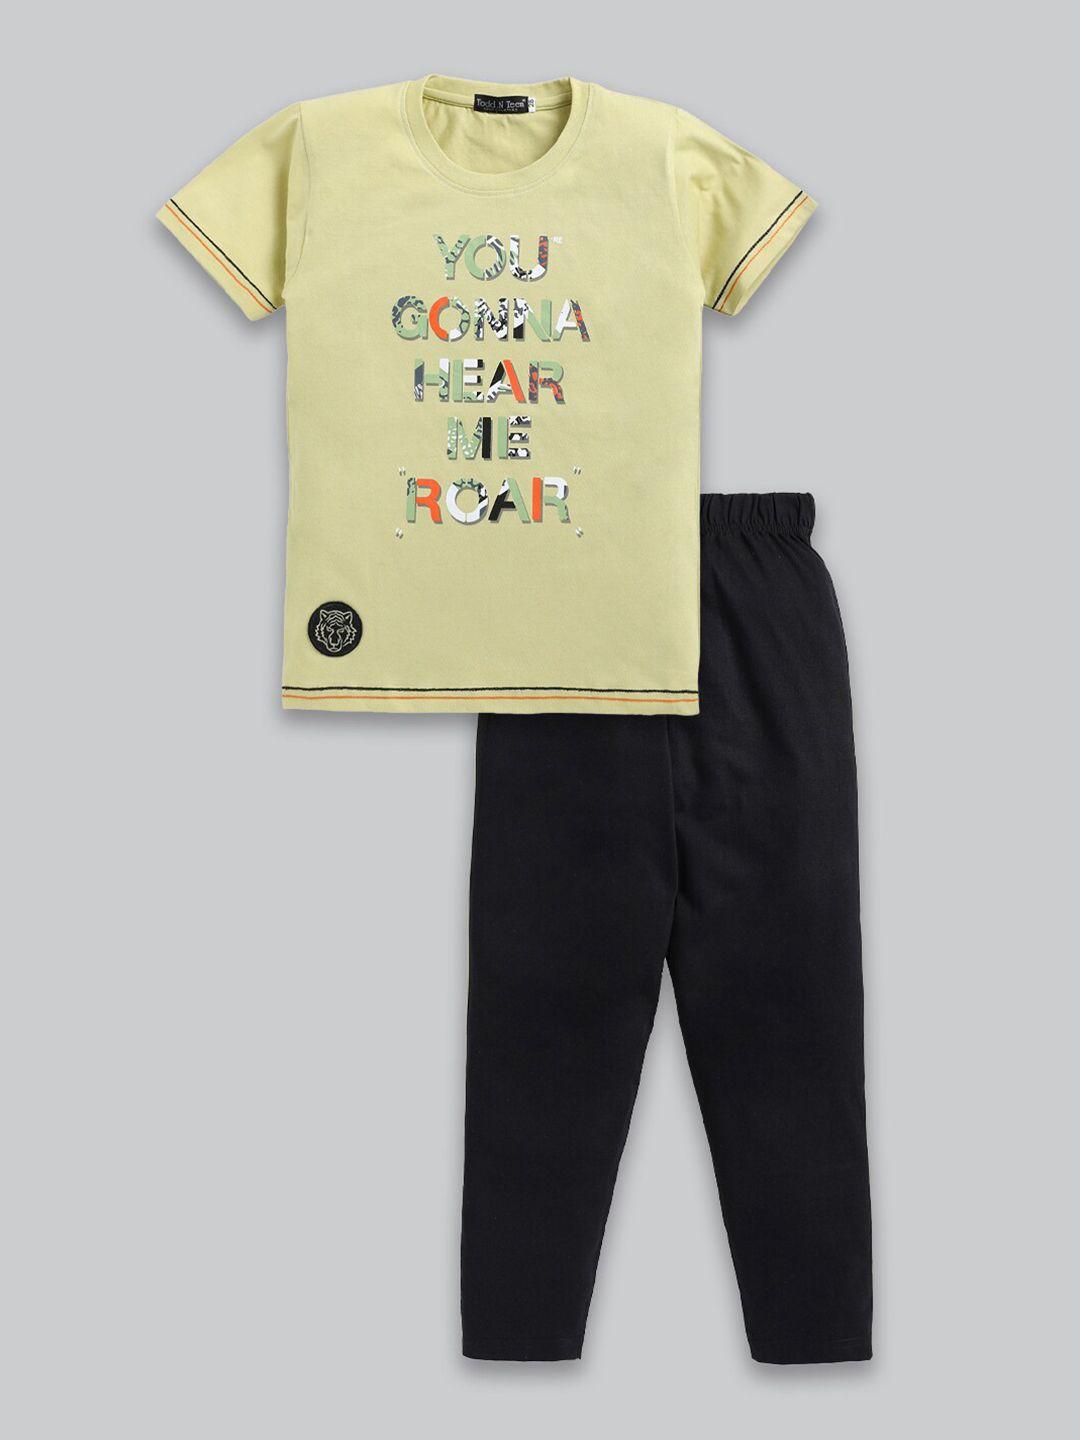 Todd N Teen Boys Typographic Printed Pure Cotton T-shirt with Trousers